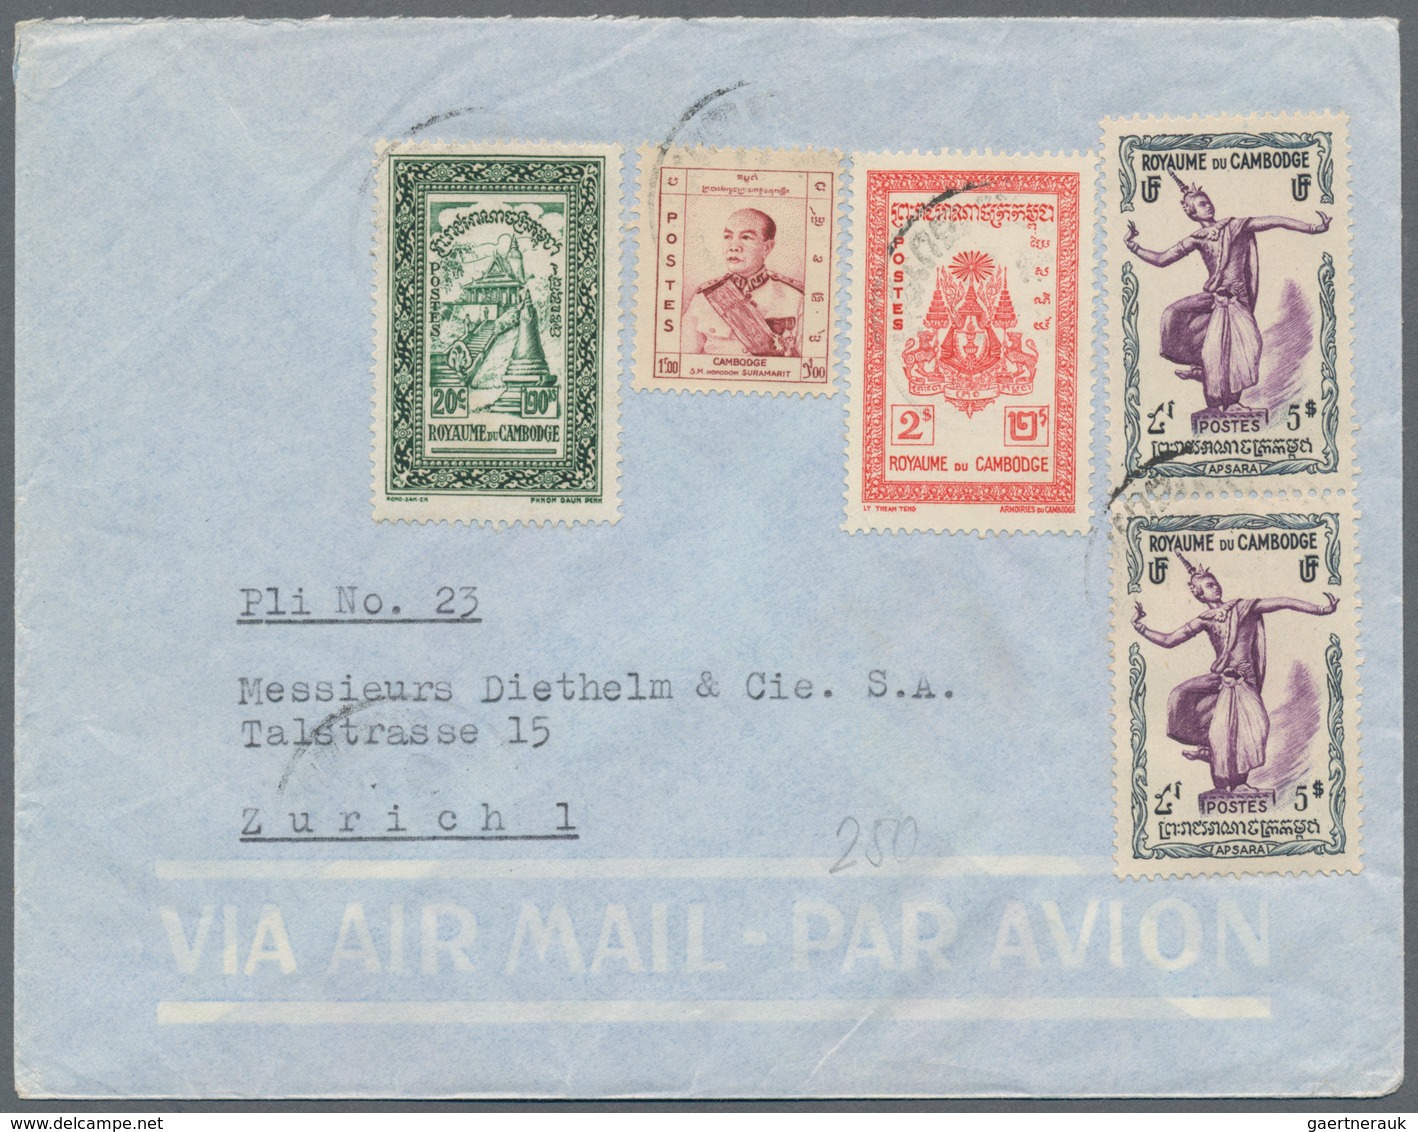 Asien: 1900/1980 (ca.), group of 42 covers/cards/stationeries, comprising Iran, Arab states, Japan,